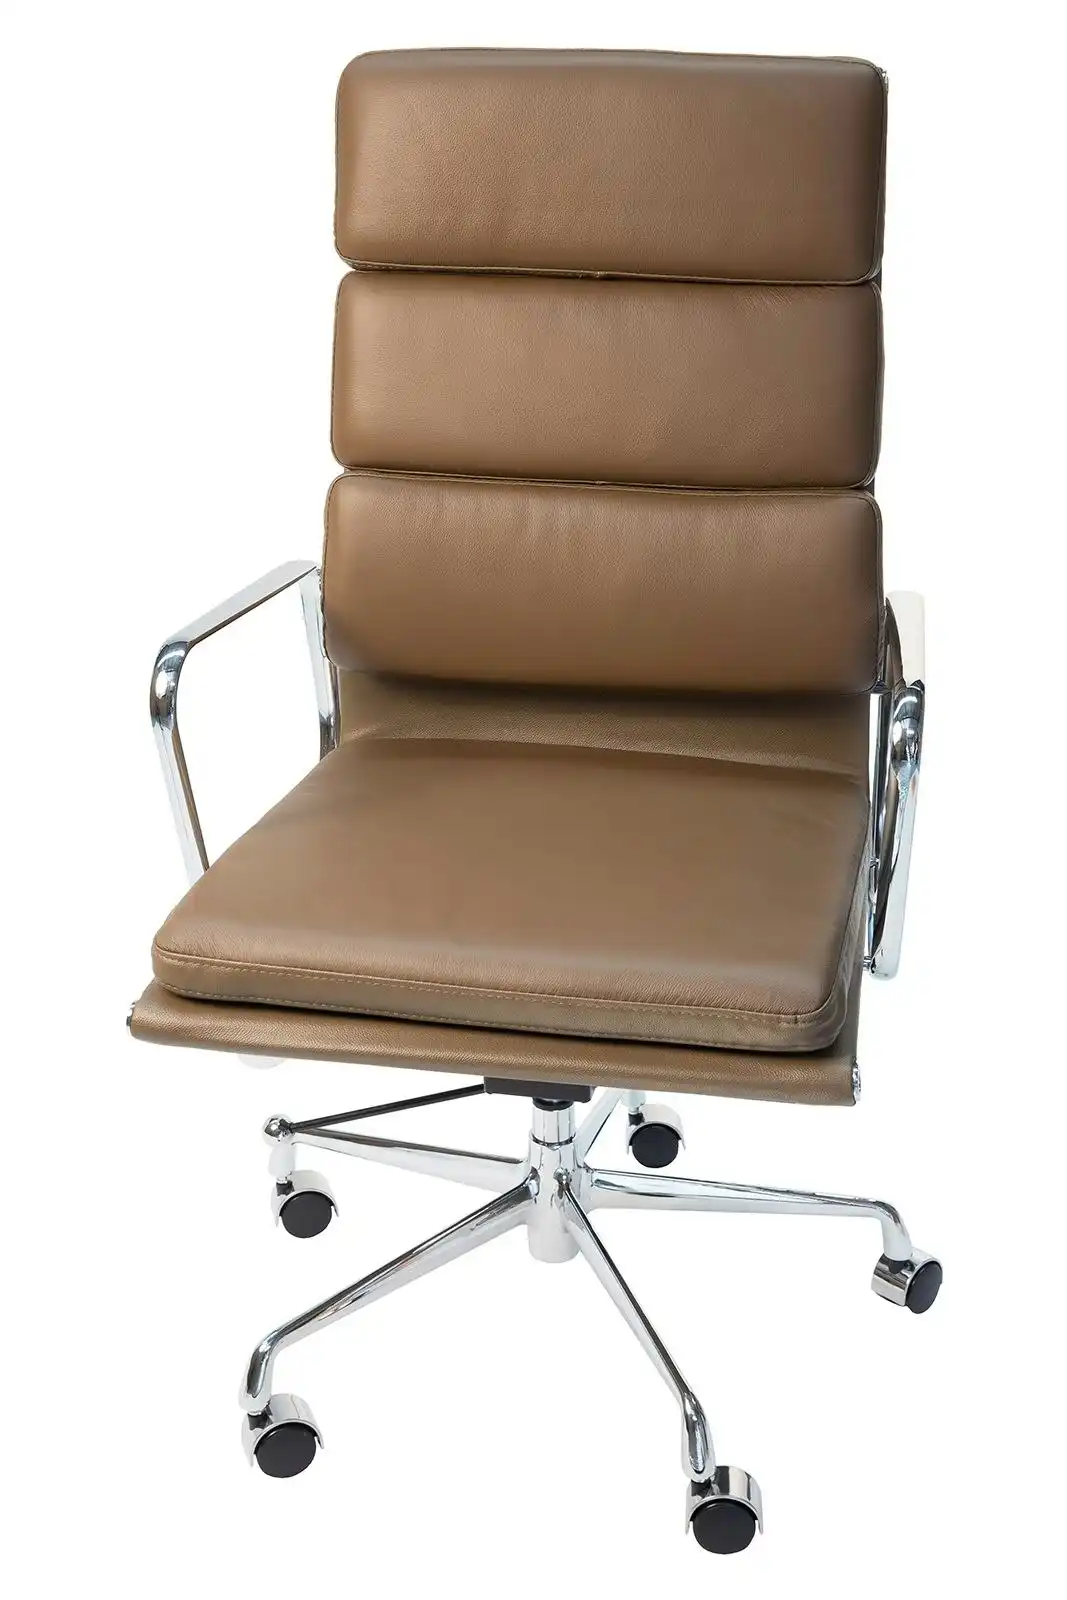 Replica Eames High Back Soft Pad Executive Desk / Office Chair